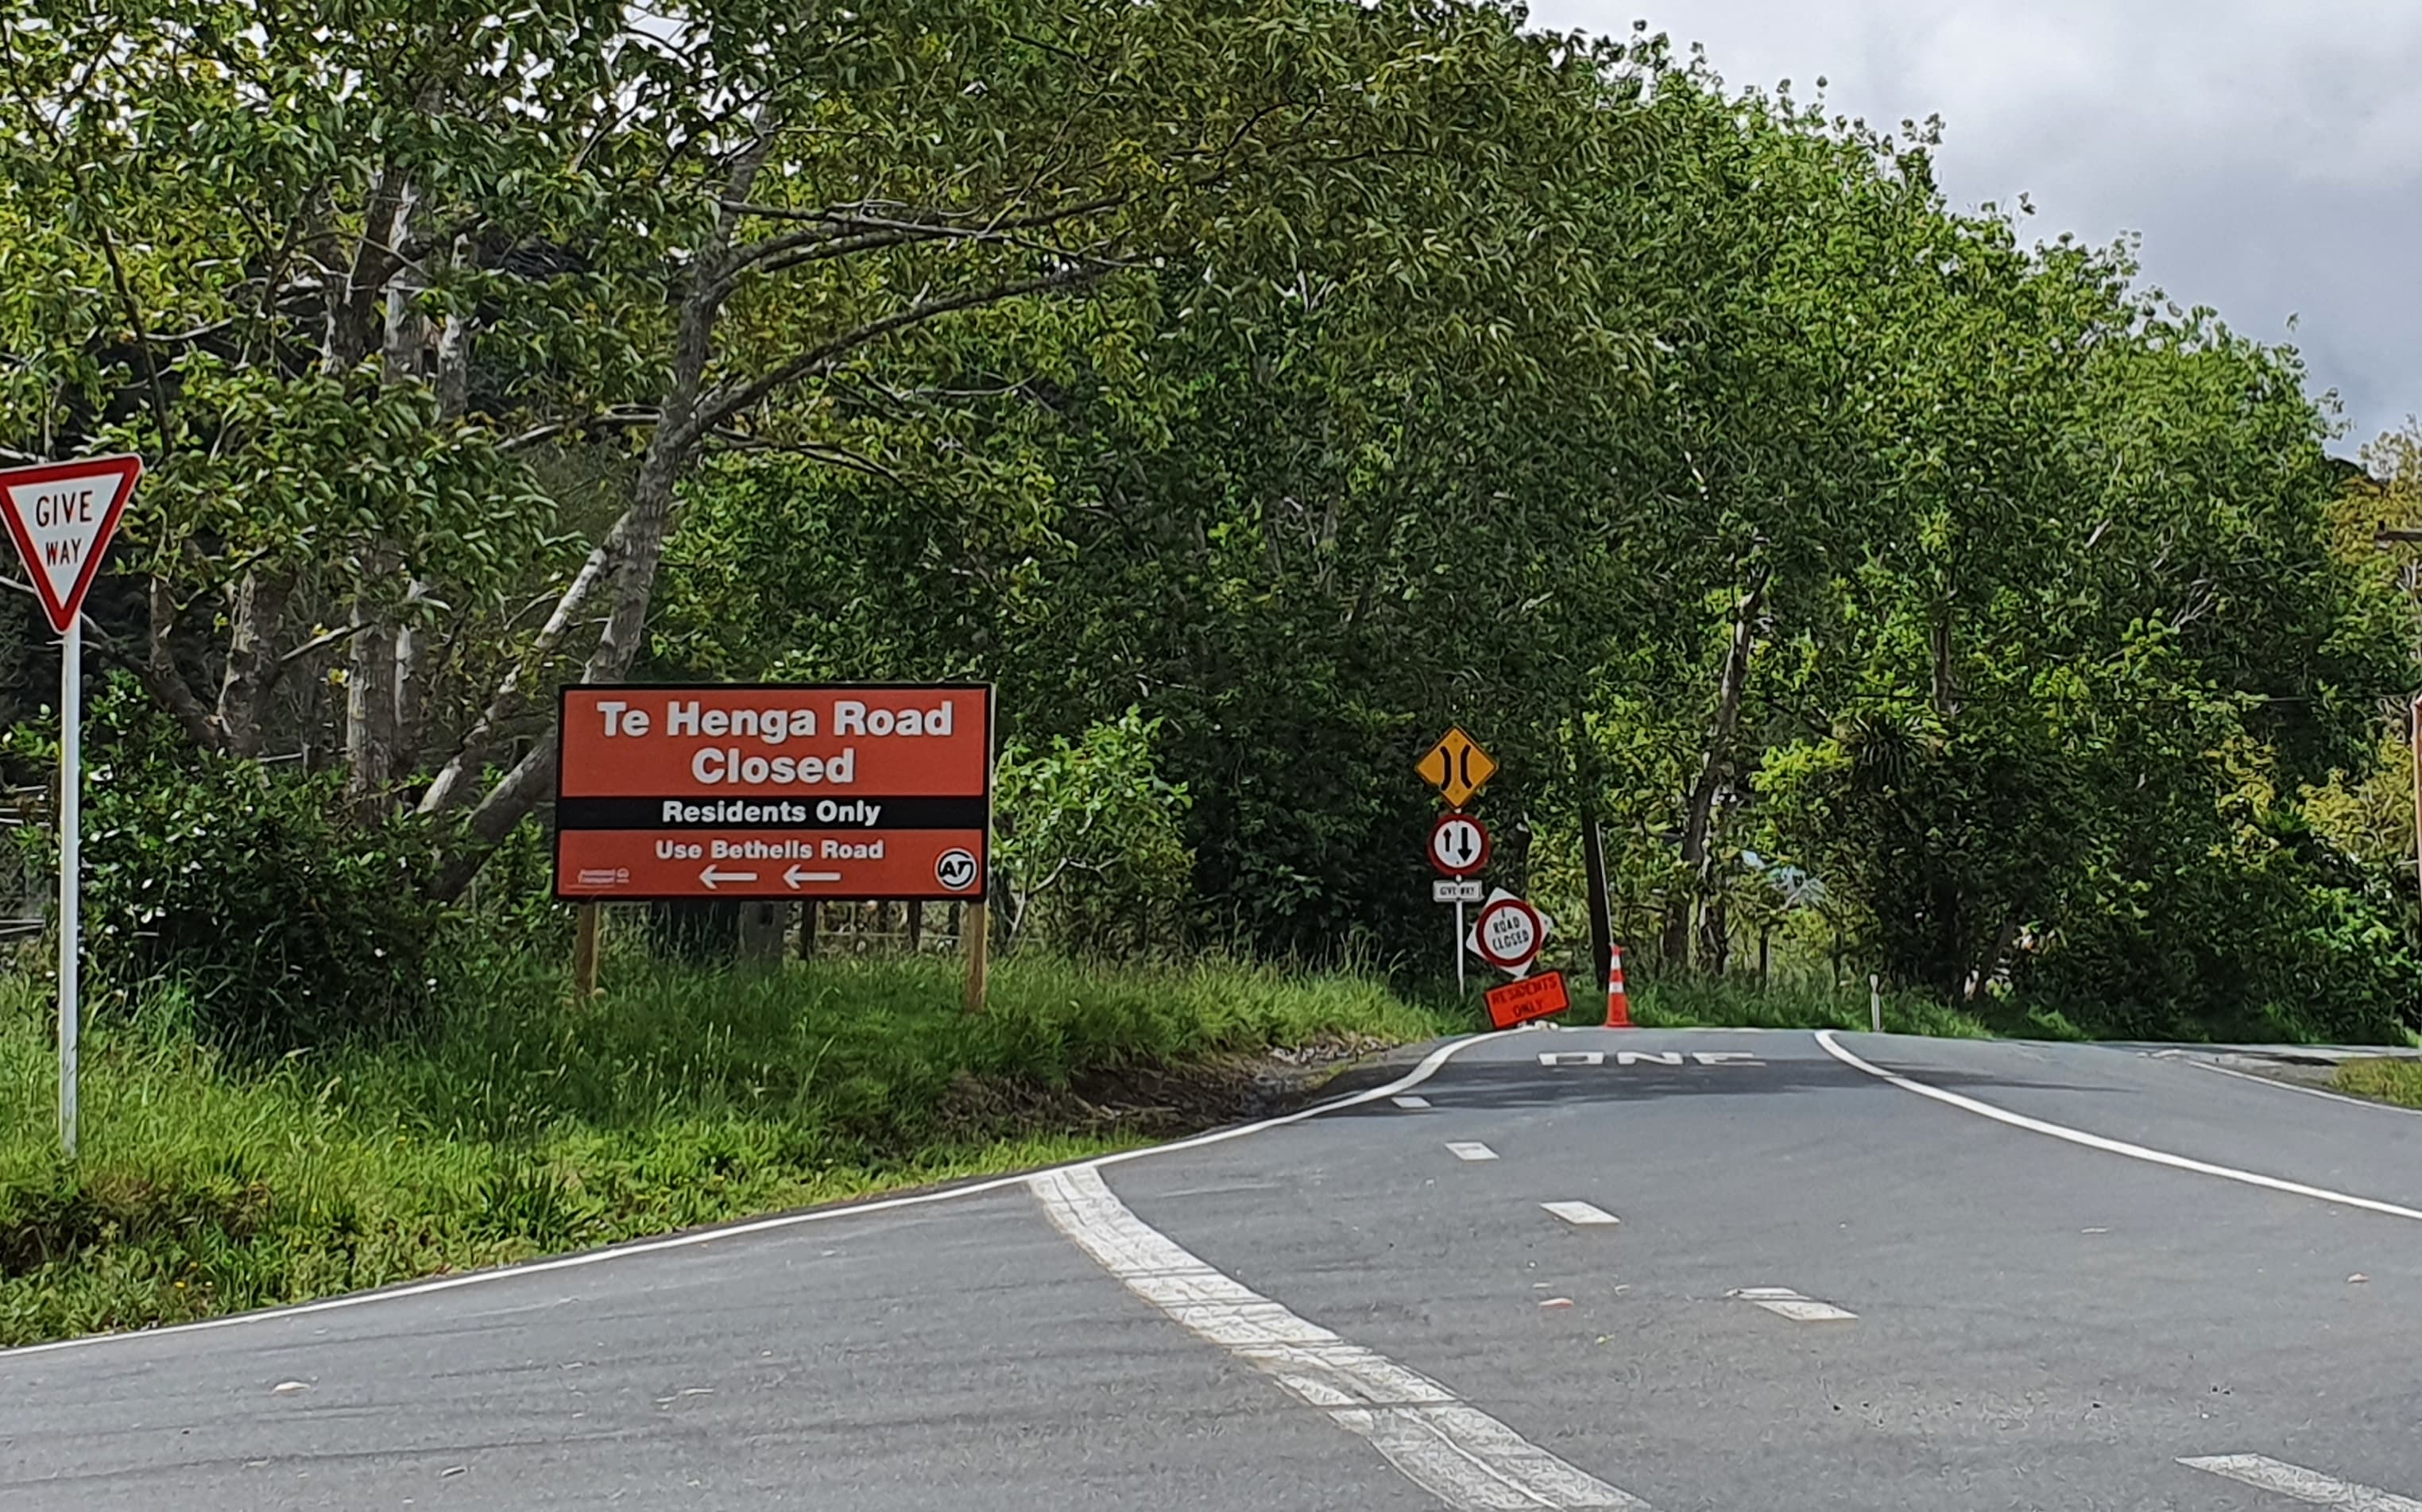 Sign showing access blocked to Te Henga Road